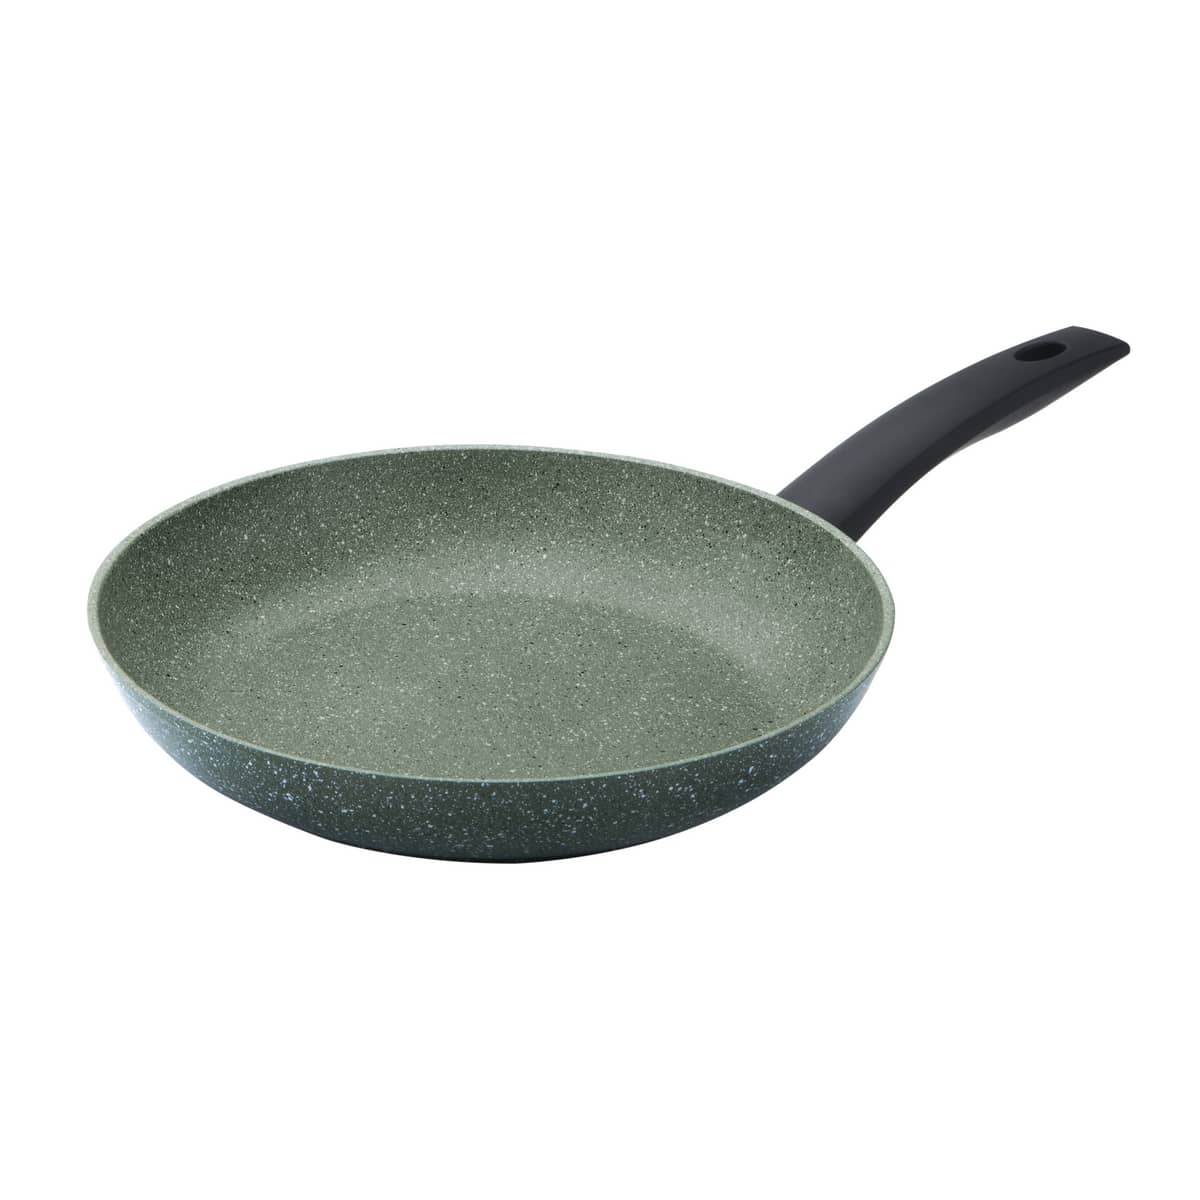 An image of Eco Non-Stick Frying Pan 28cm